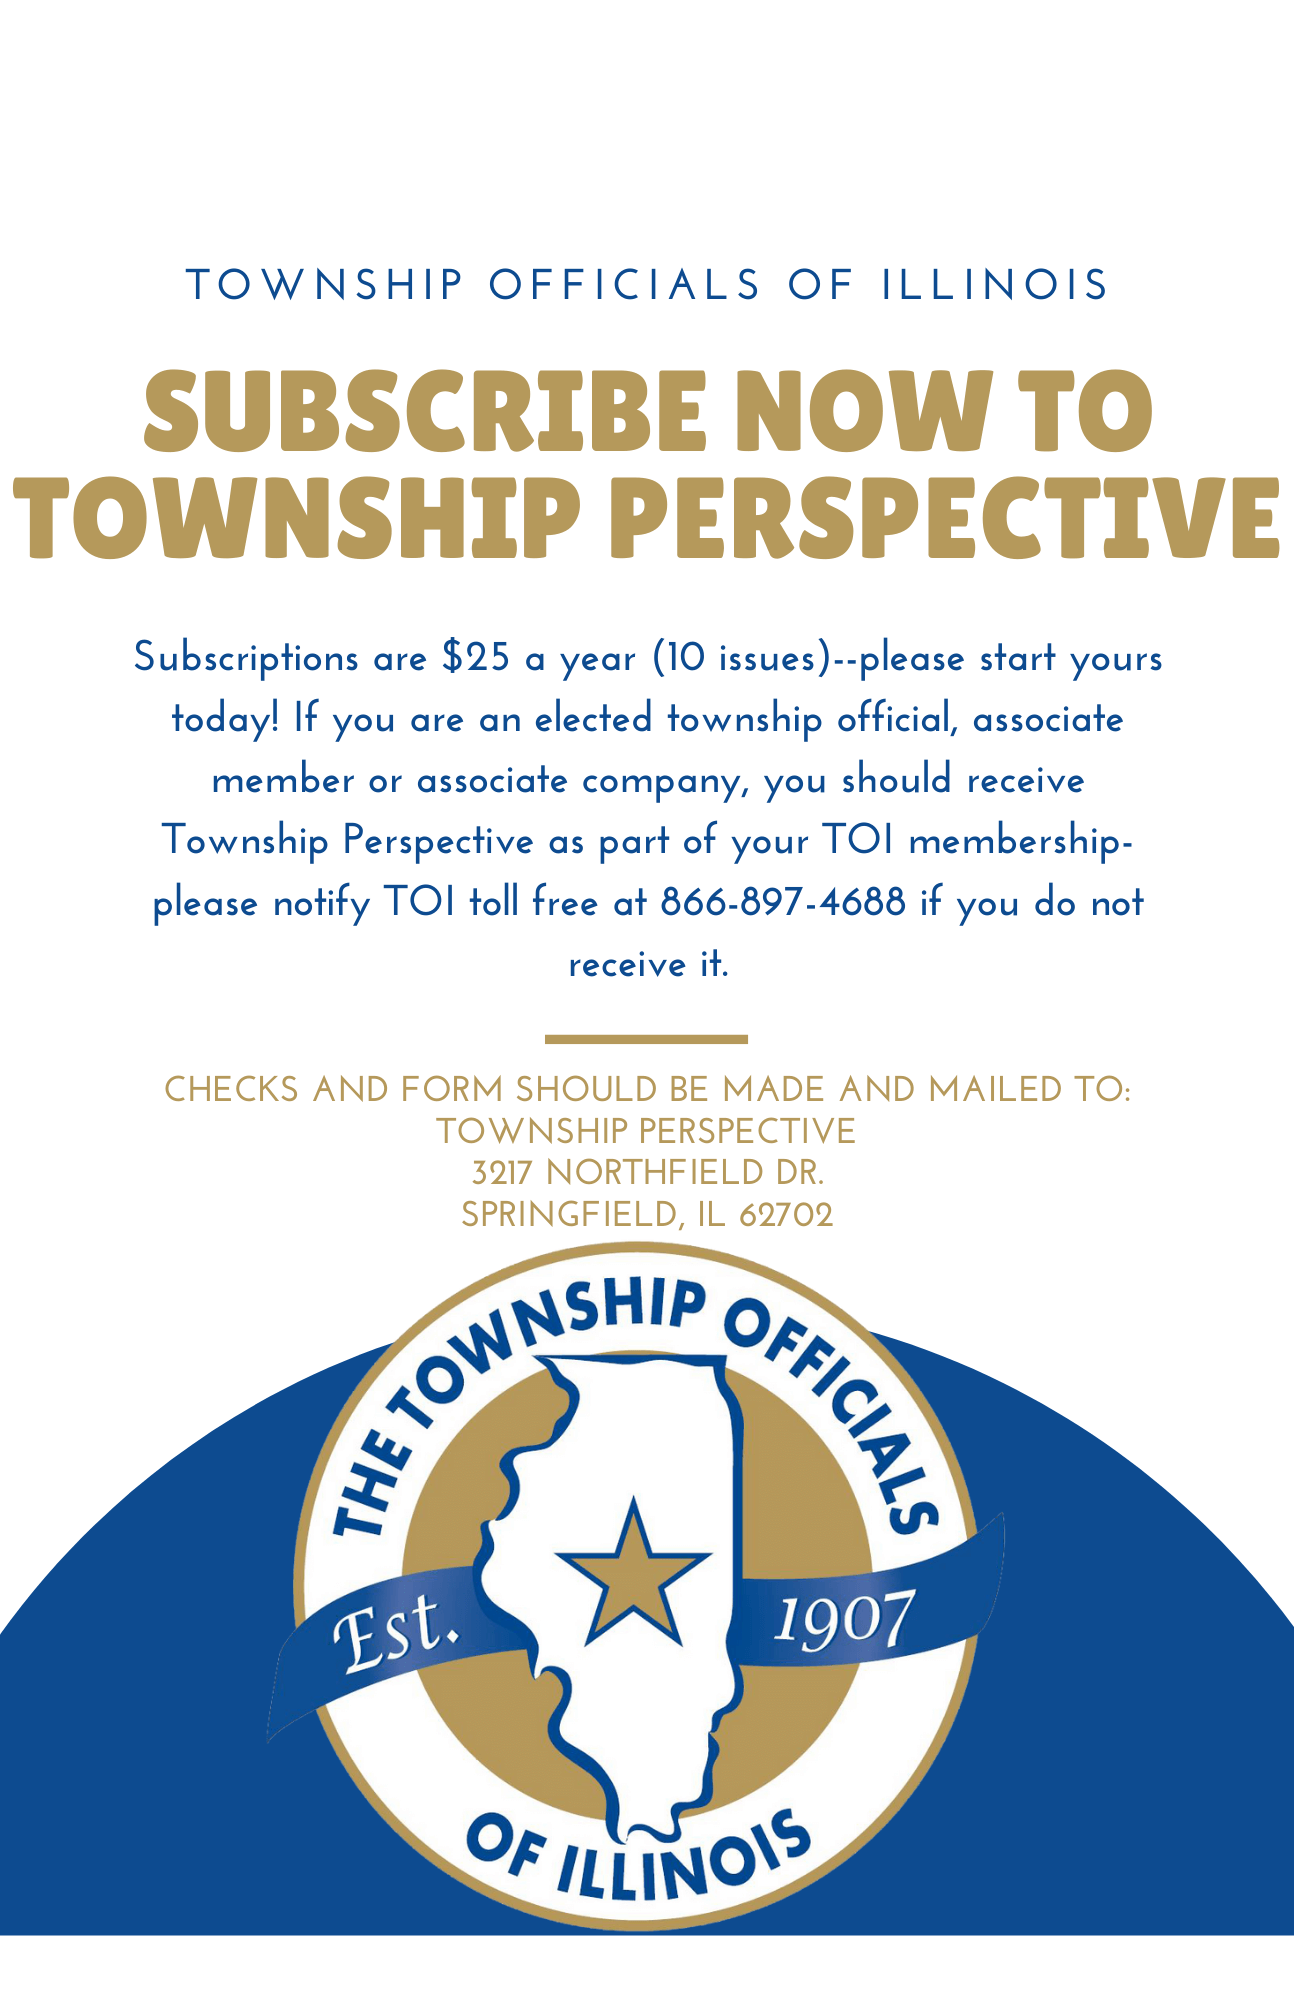 Subscribe to Township Officials of Illinois